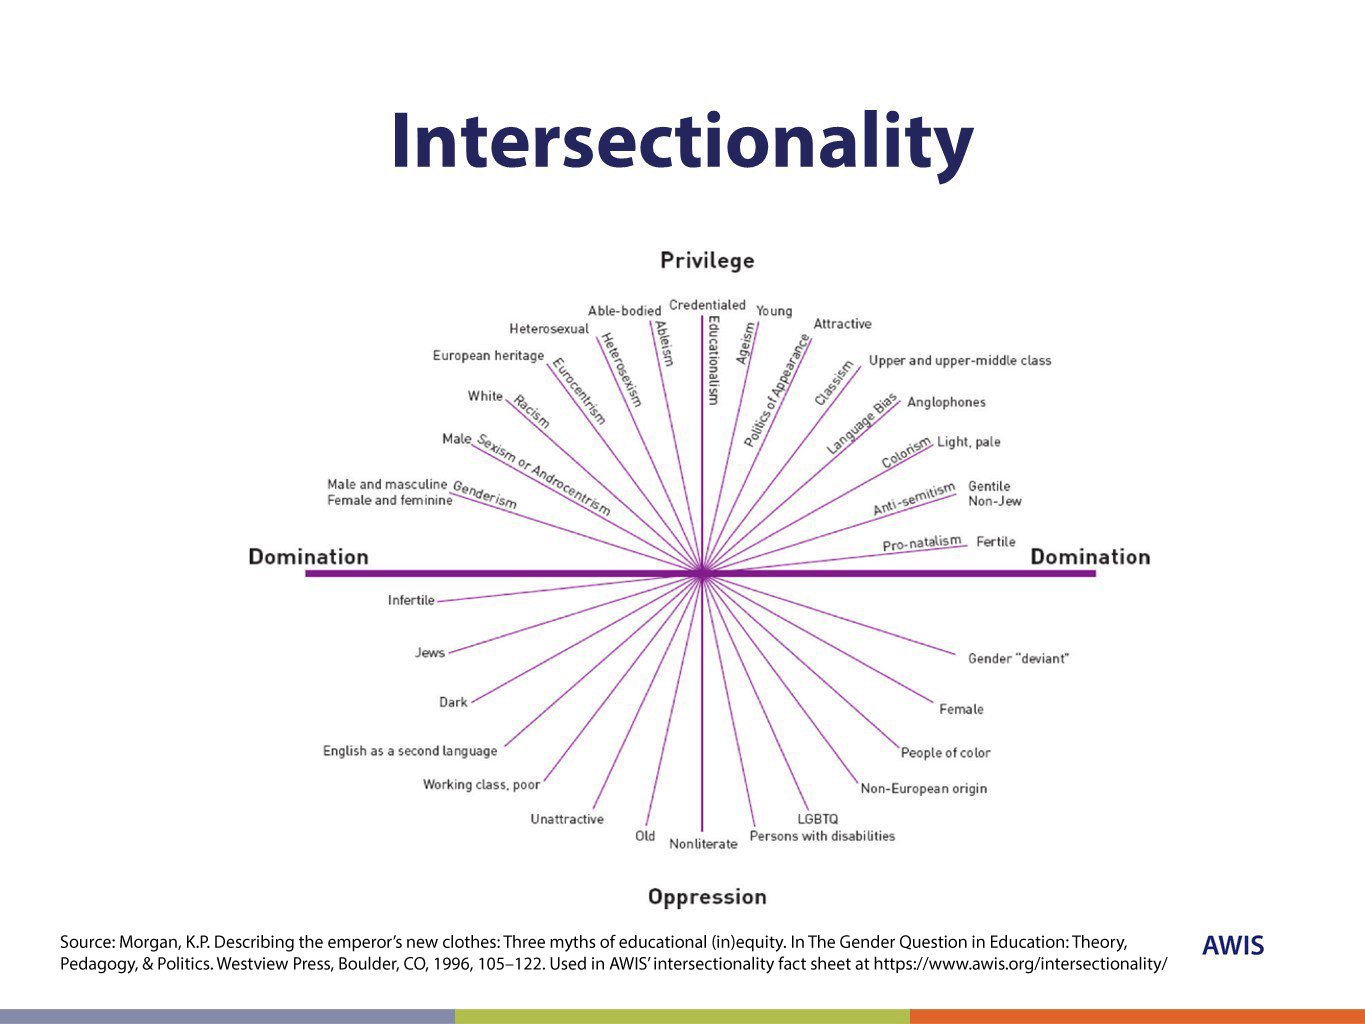 intersectionality-sources-cited